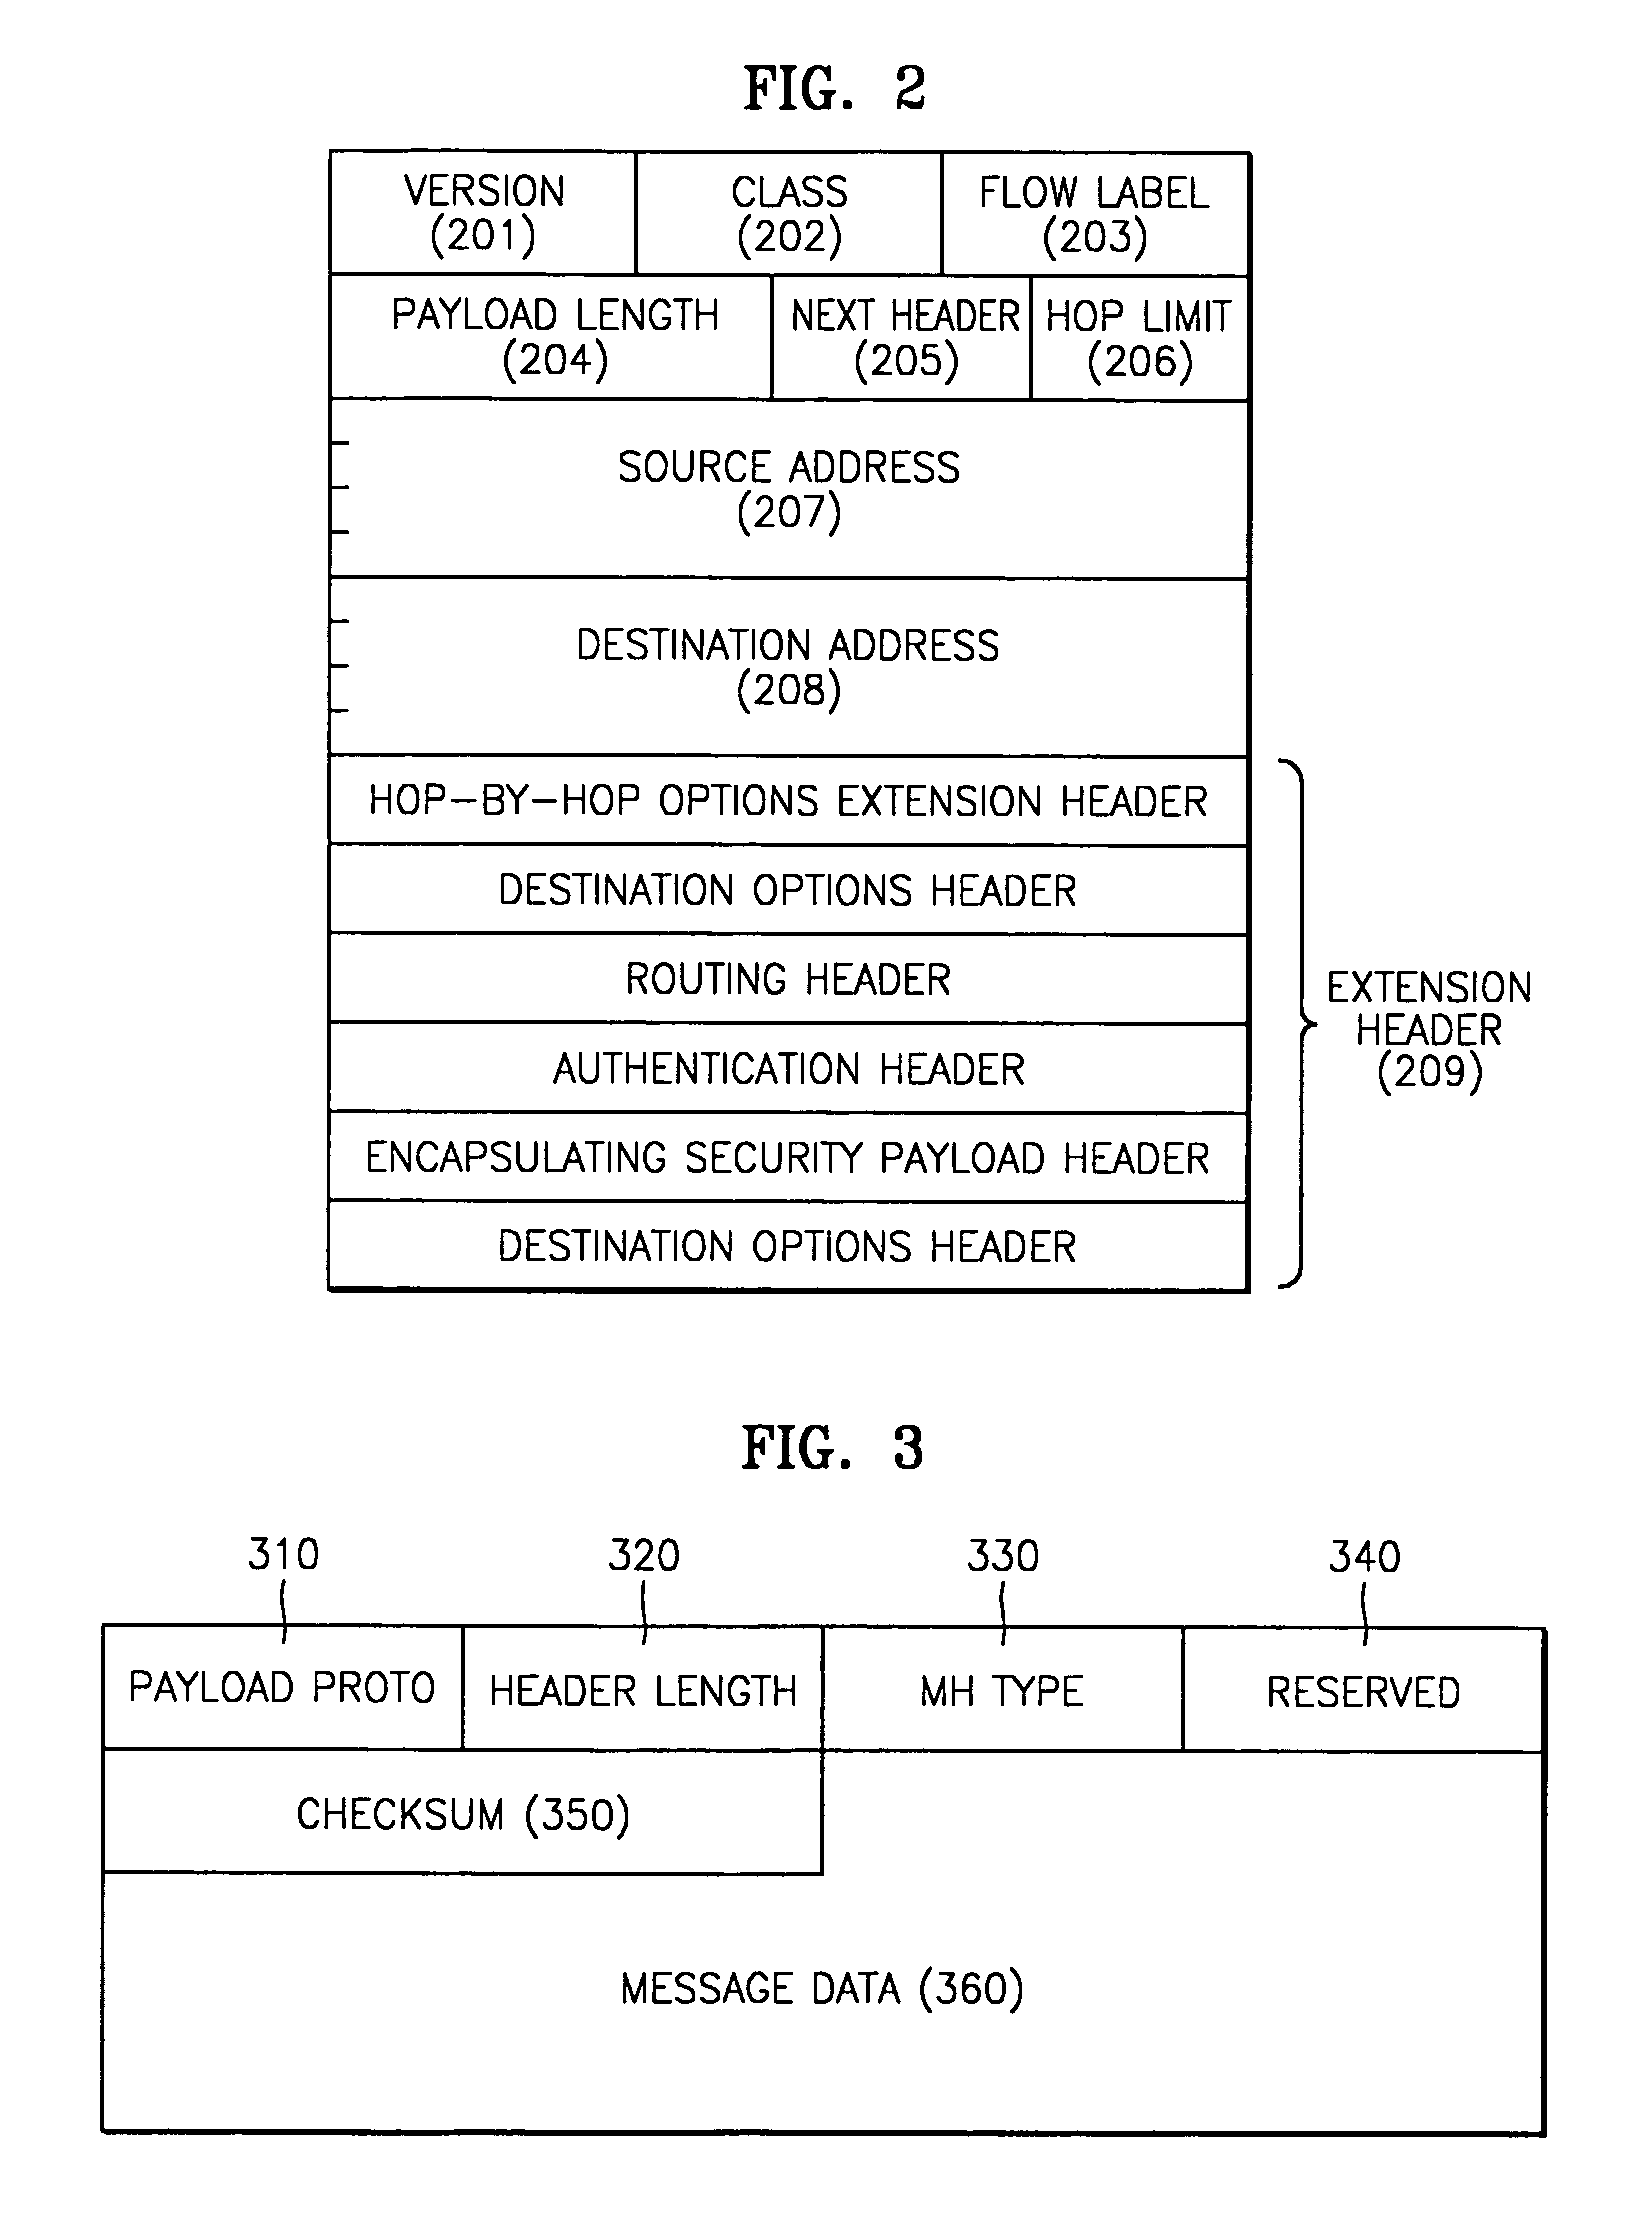 Home agent management apparatus and method